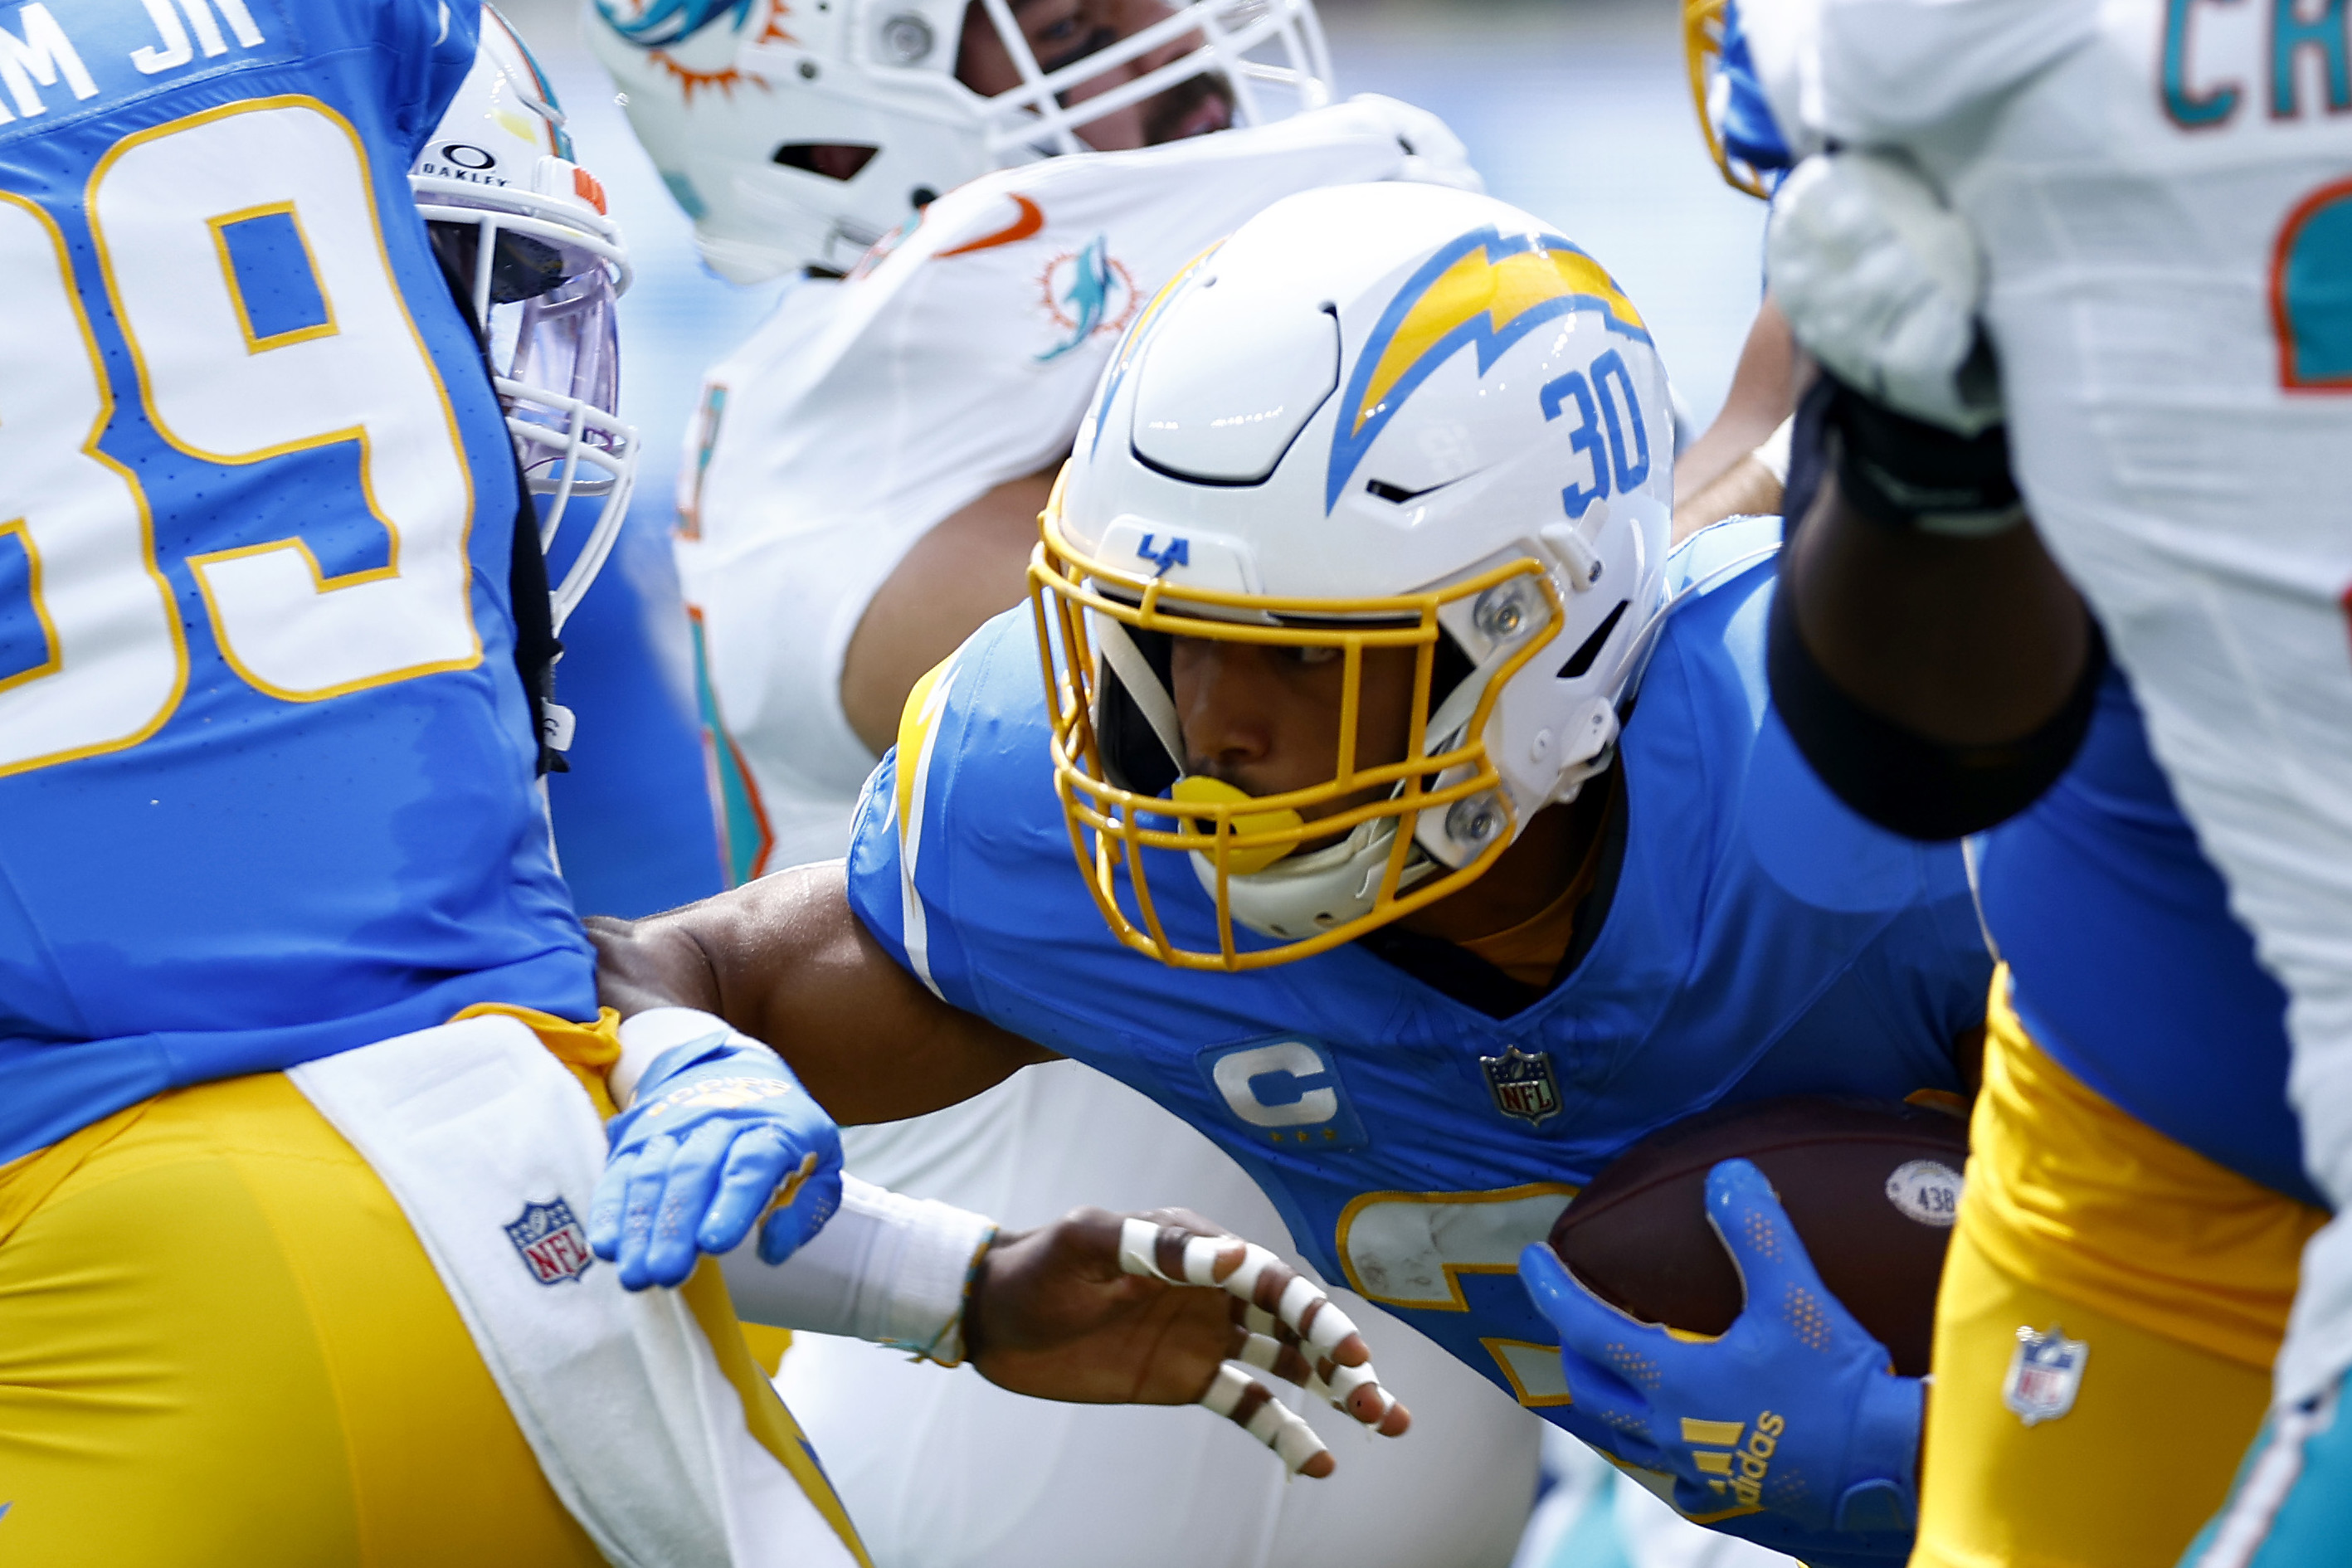 Los Angeles Chargers vs. Tennessee Titans highlights